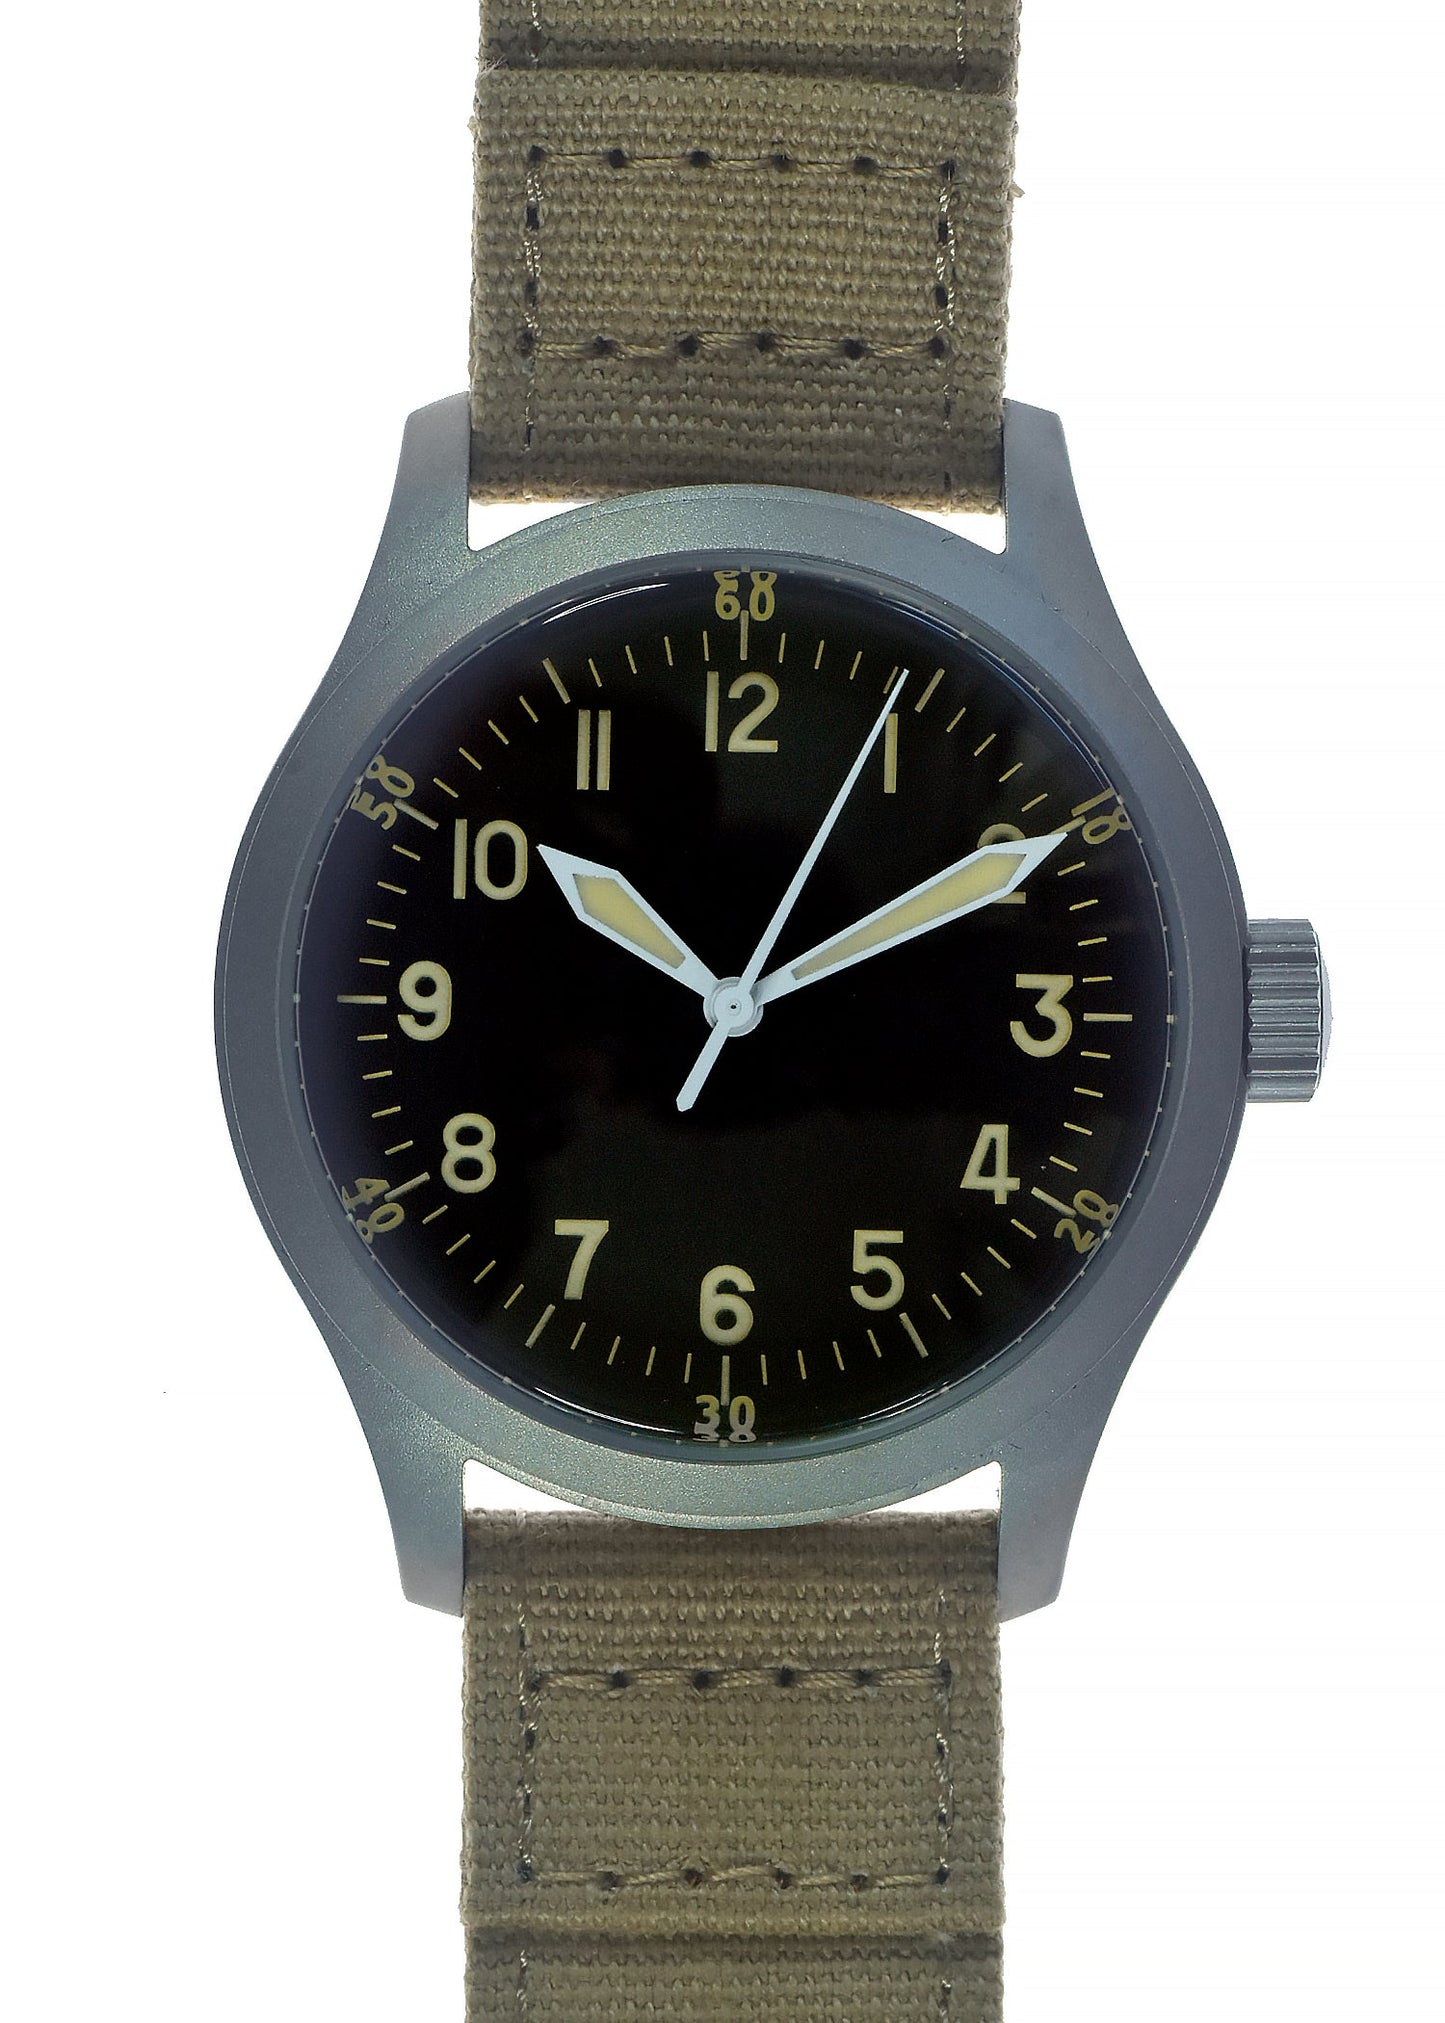 A-11 1940s WWII Pattern Military Watch (Quartz) with 100m Water Resistance